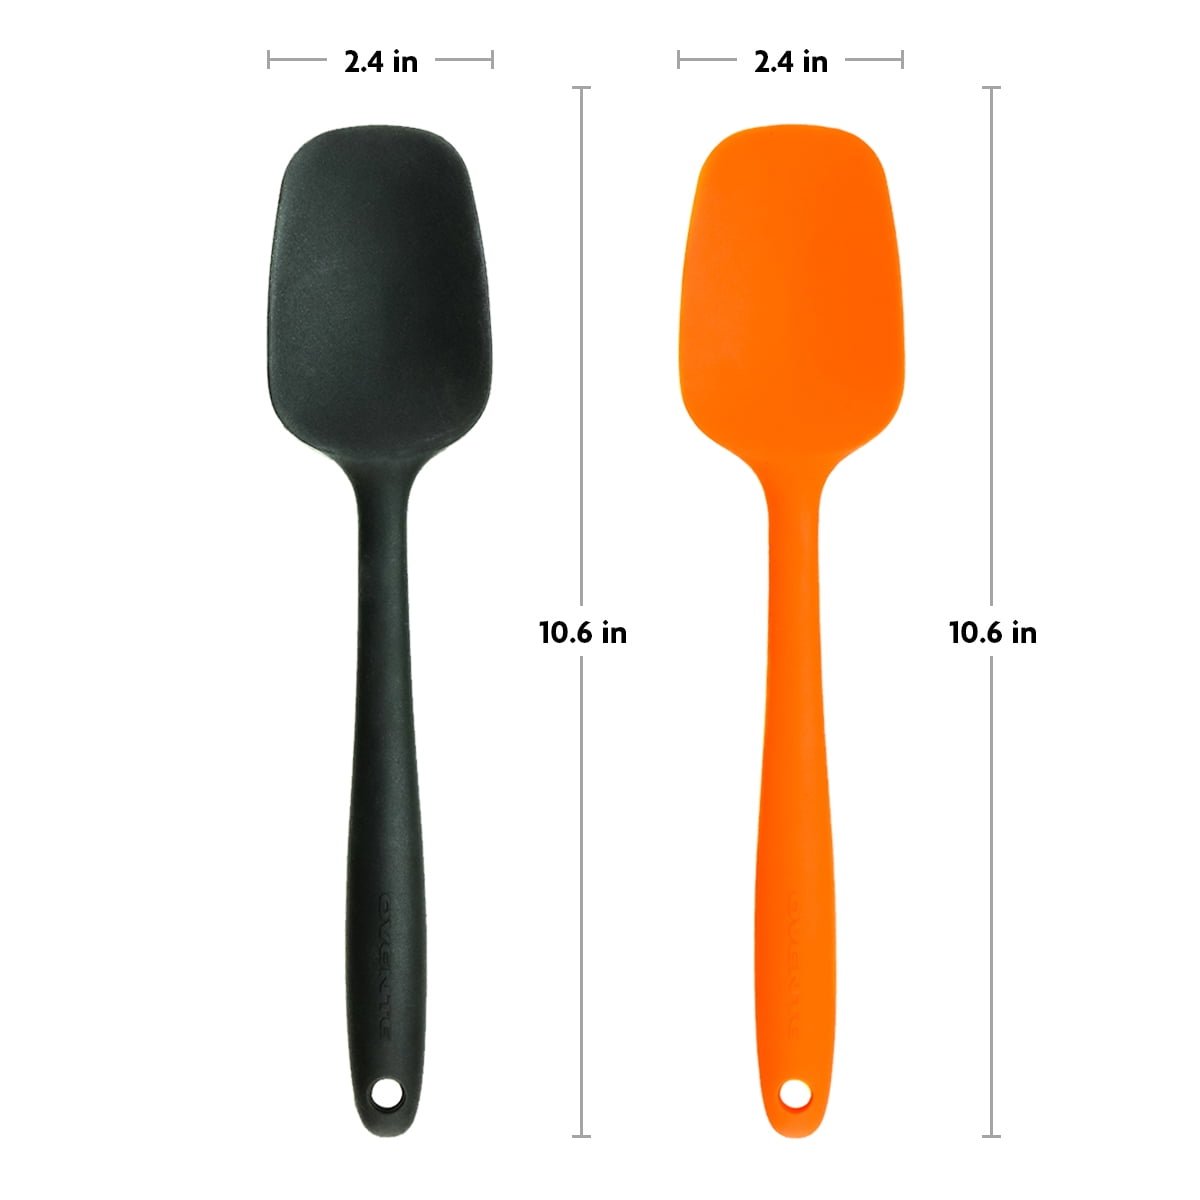 OVENTE Green Non-Stick Silicone Spatula Set with Heat Resistant and  Stainless Steel Core (Set of 5) SP12305G - The Home Depot